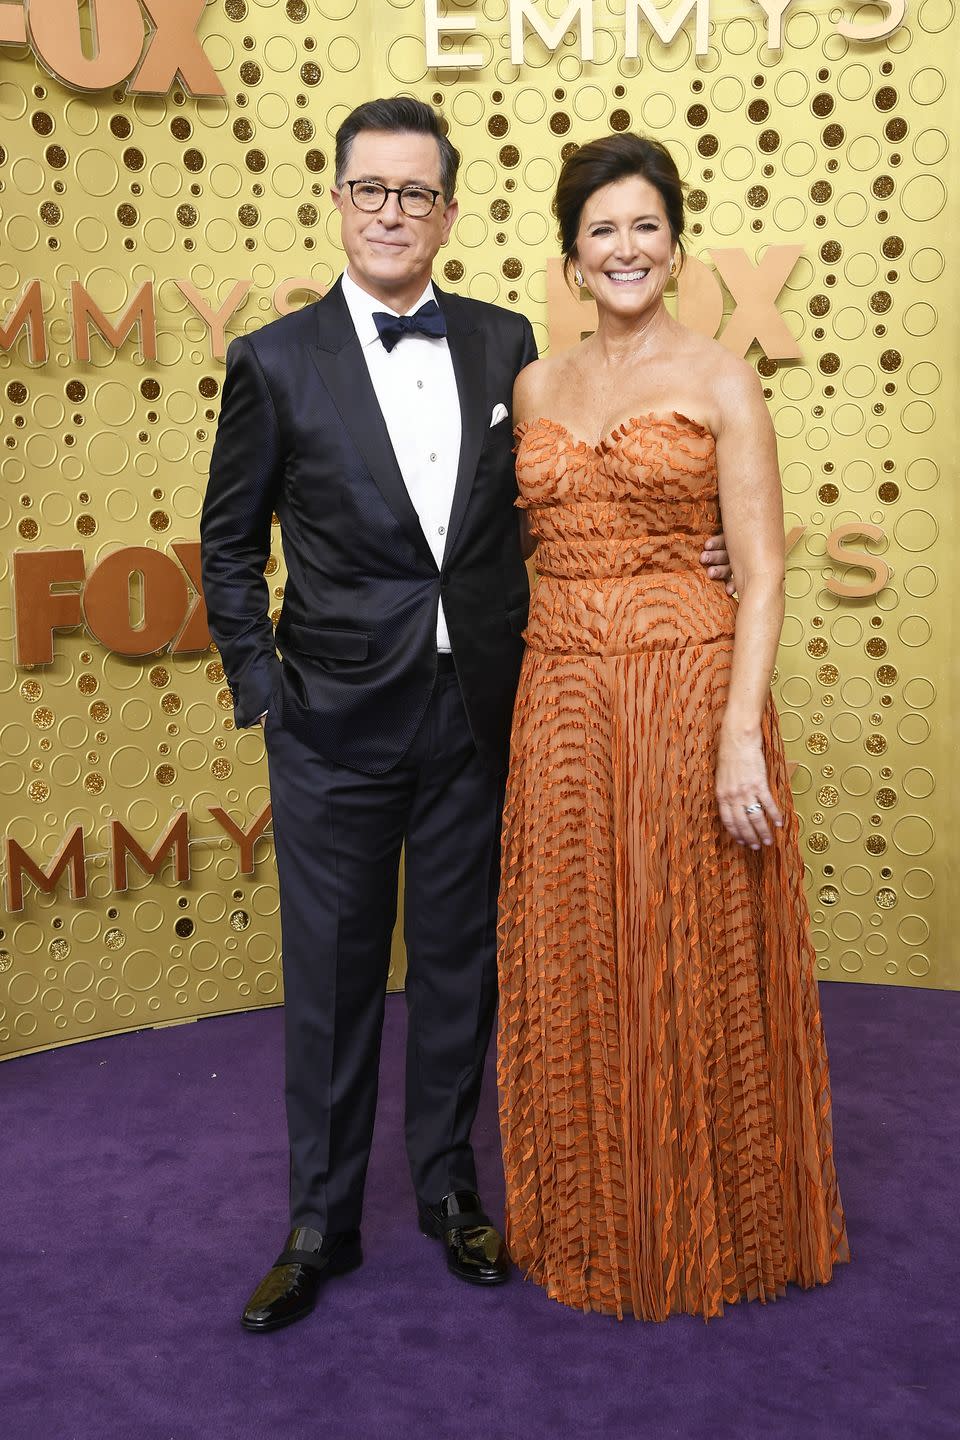 Stephen Colbert and Evelyn McGee